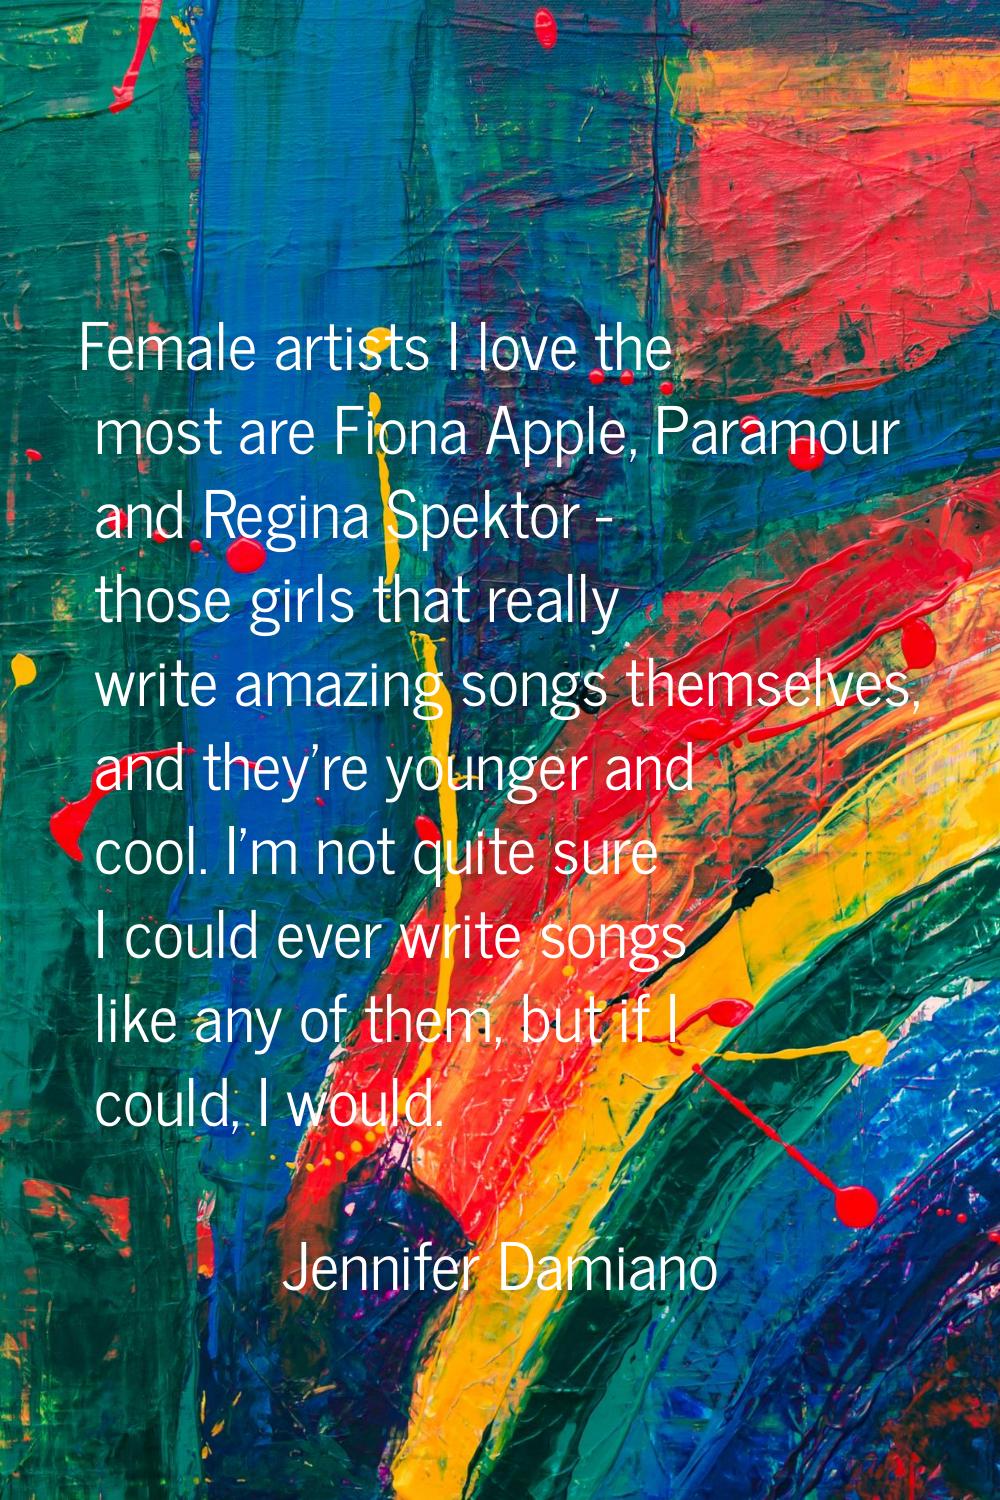 Female artists I love the most are Fiona Apple, Paramour and Regina Spektor - those girls that real